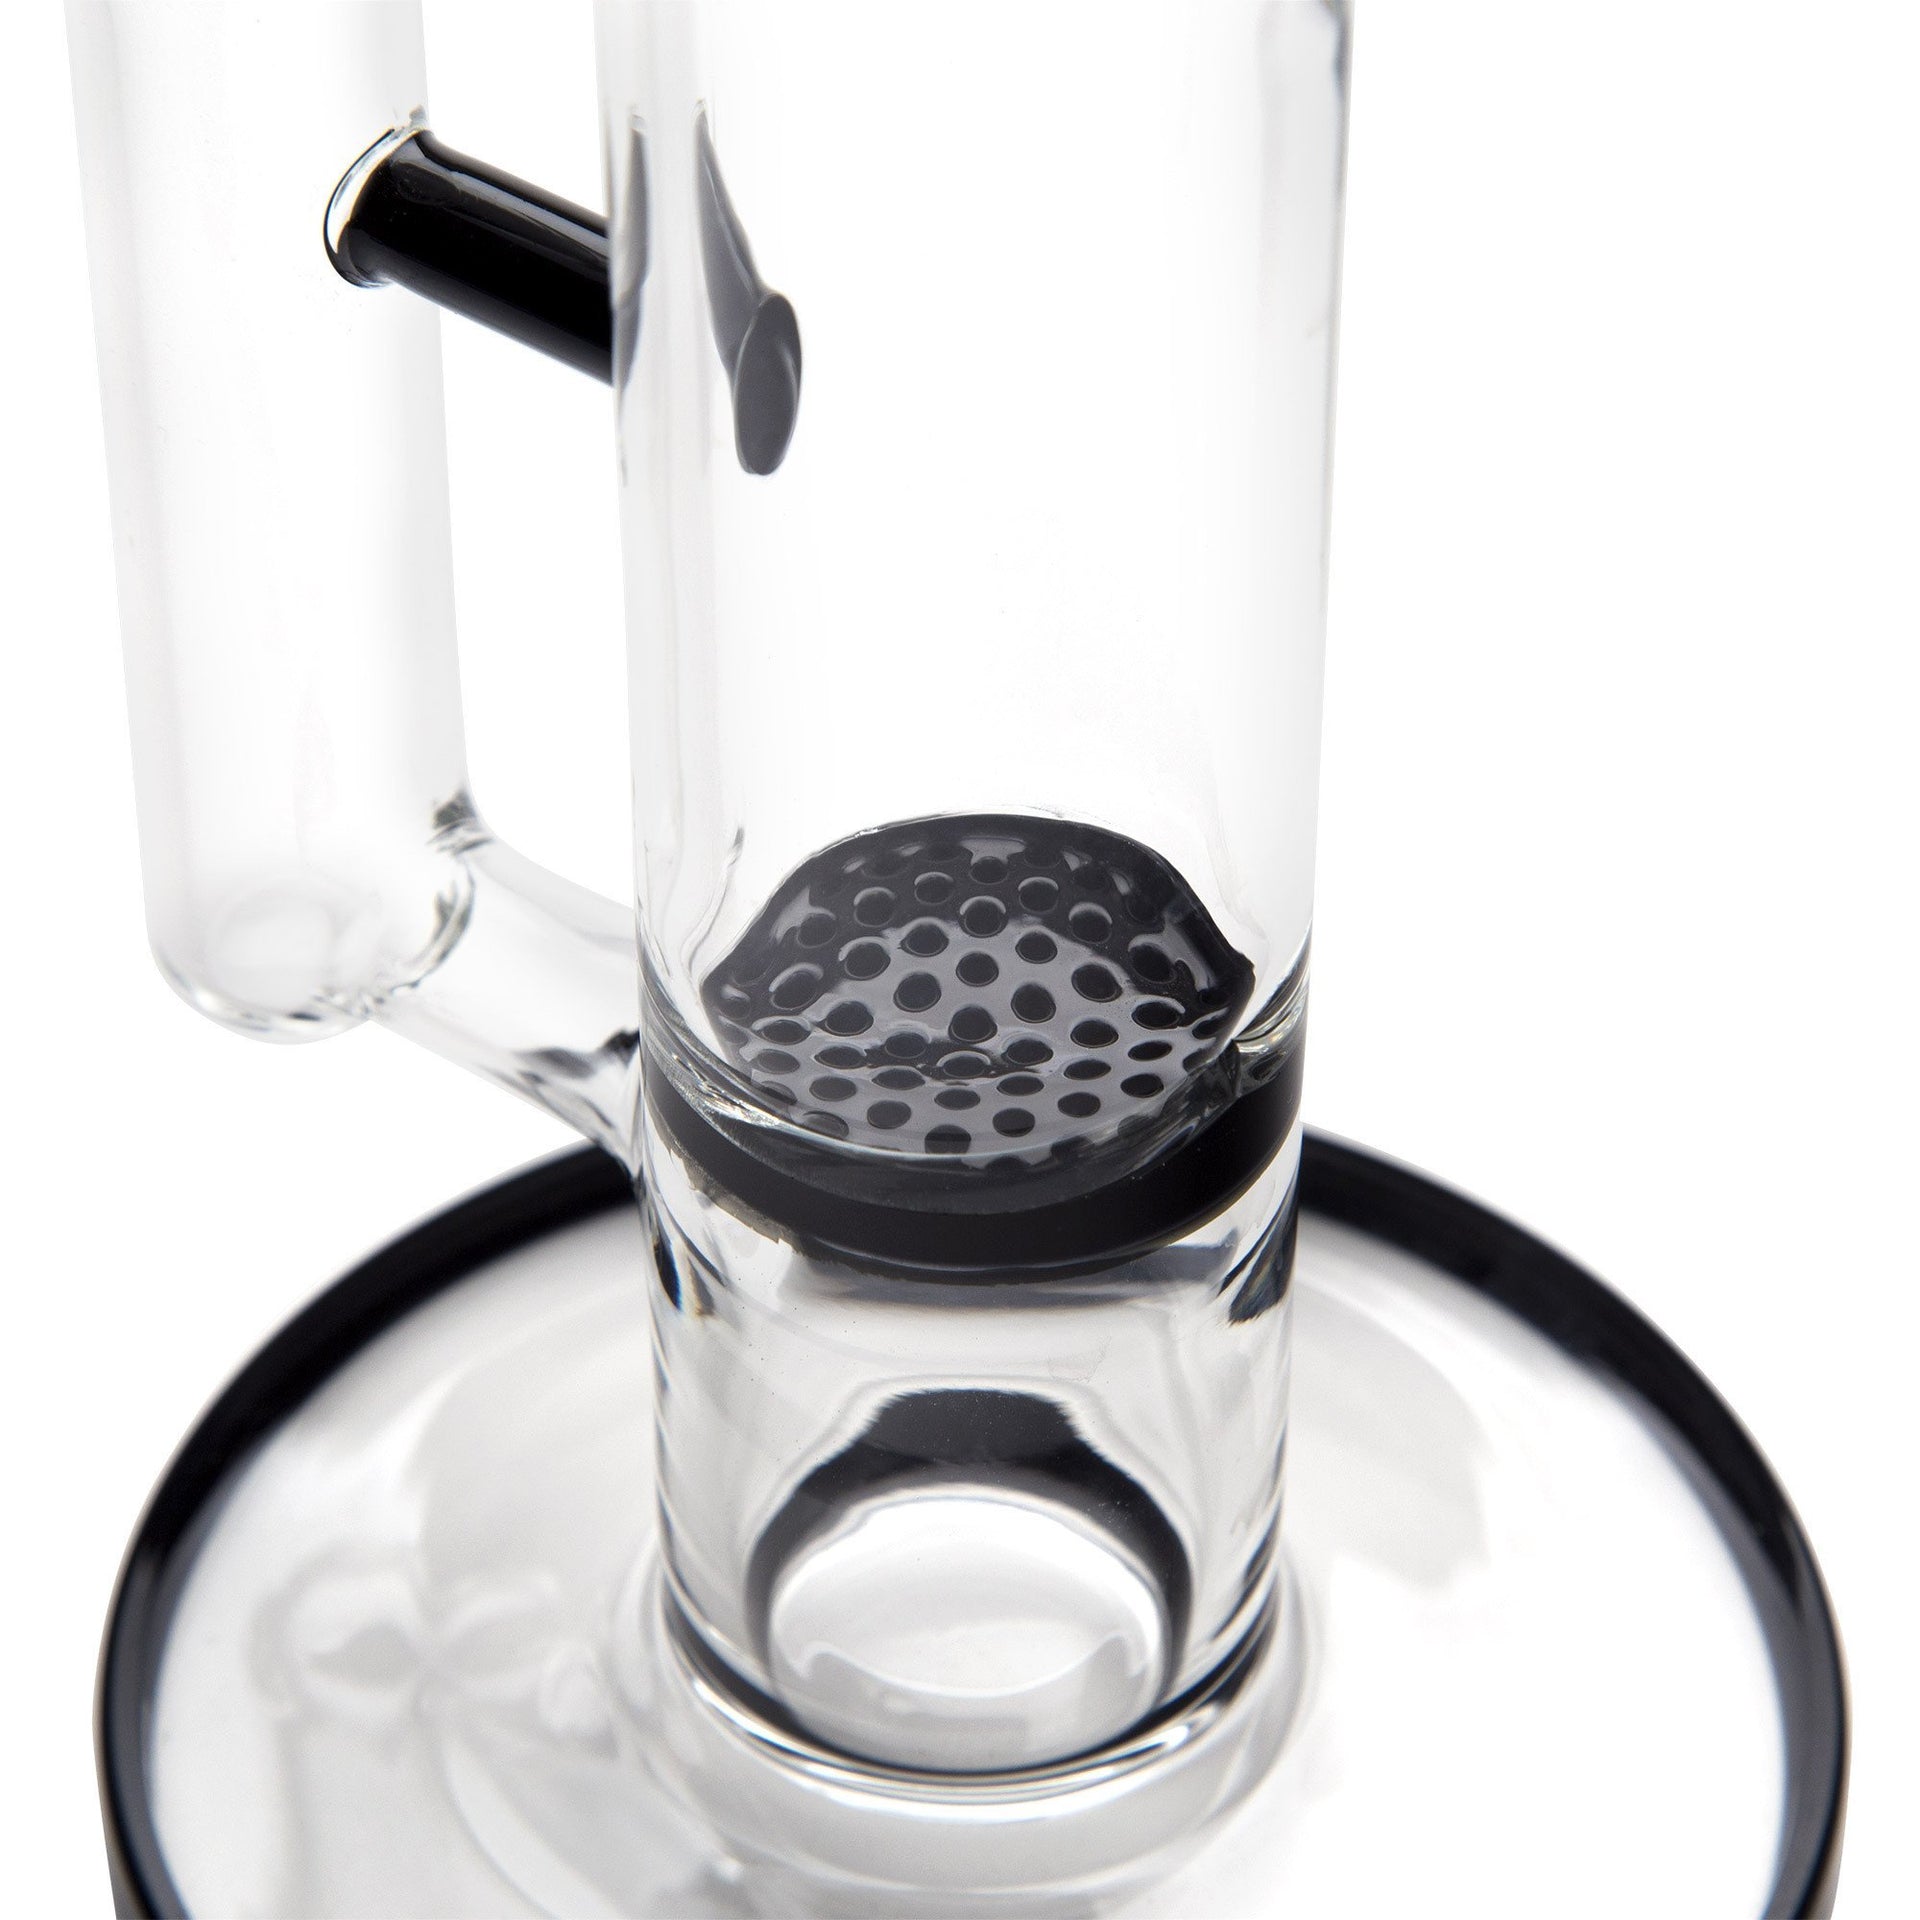 GRAV 12in Flare Water Pipe w/ Honey Comb Disc - Black - 420 Science - The most trusted online smoke shop.